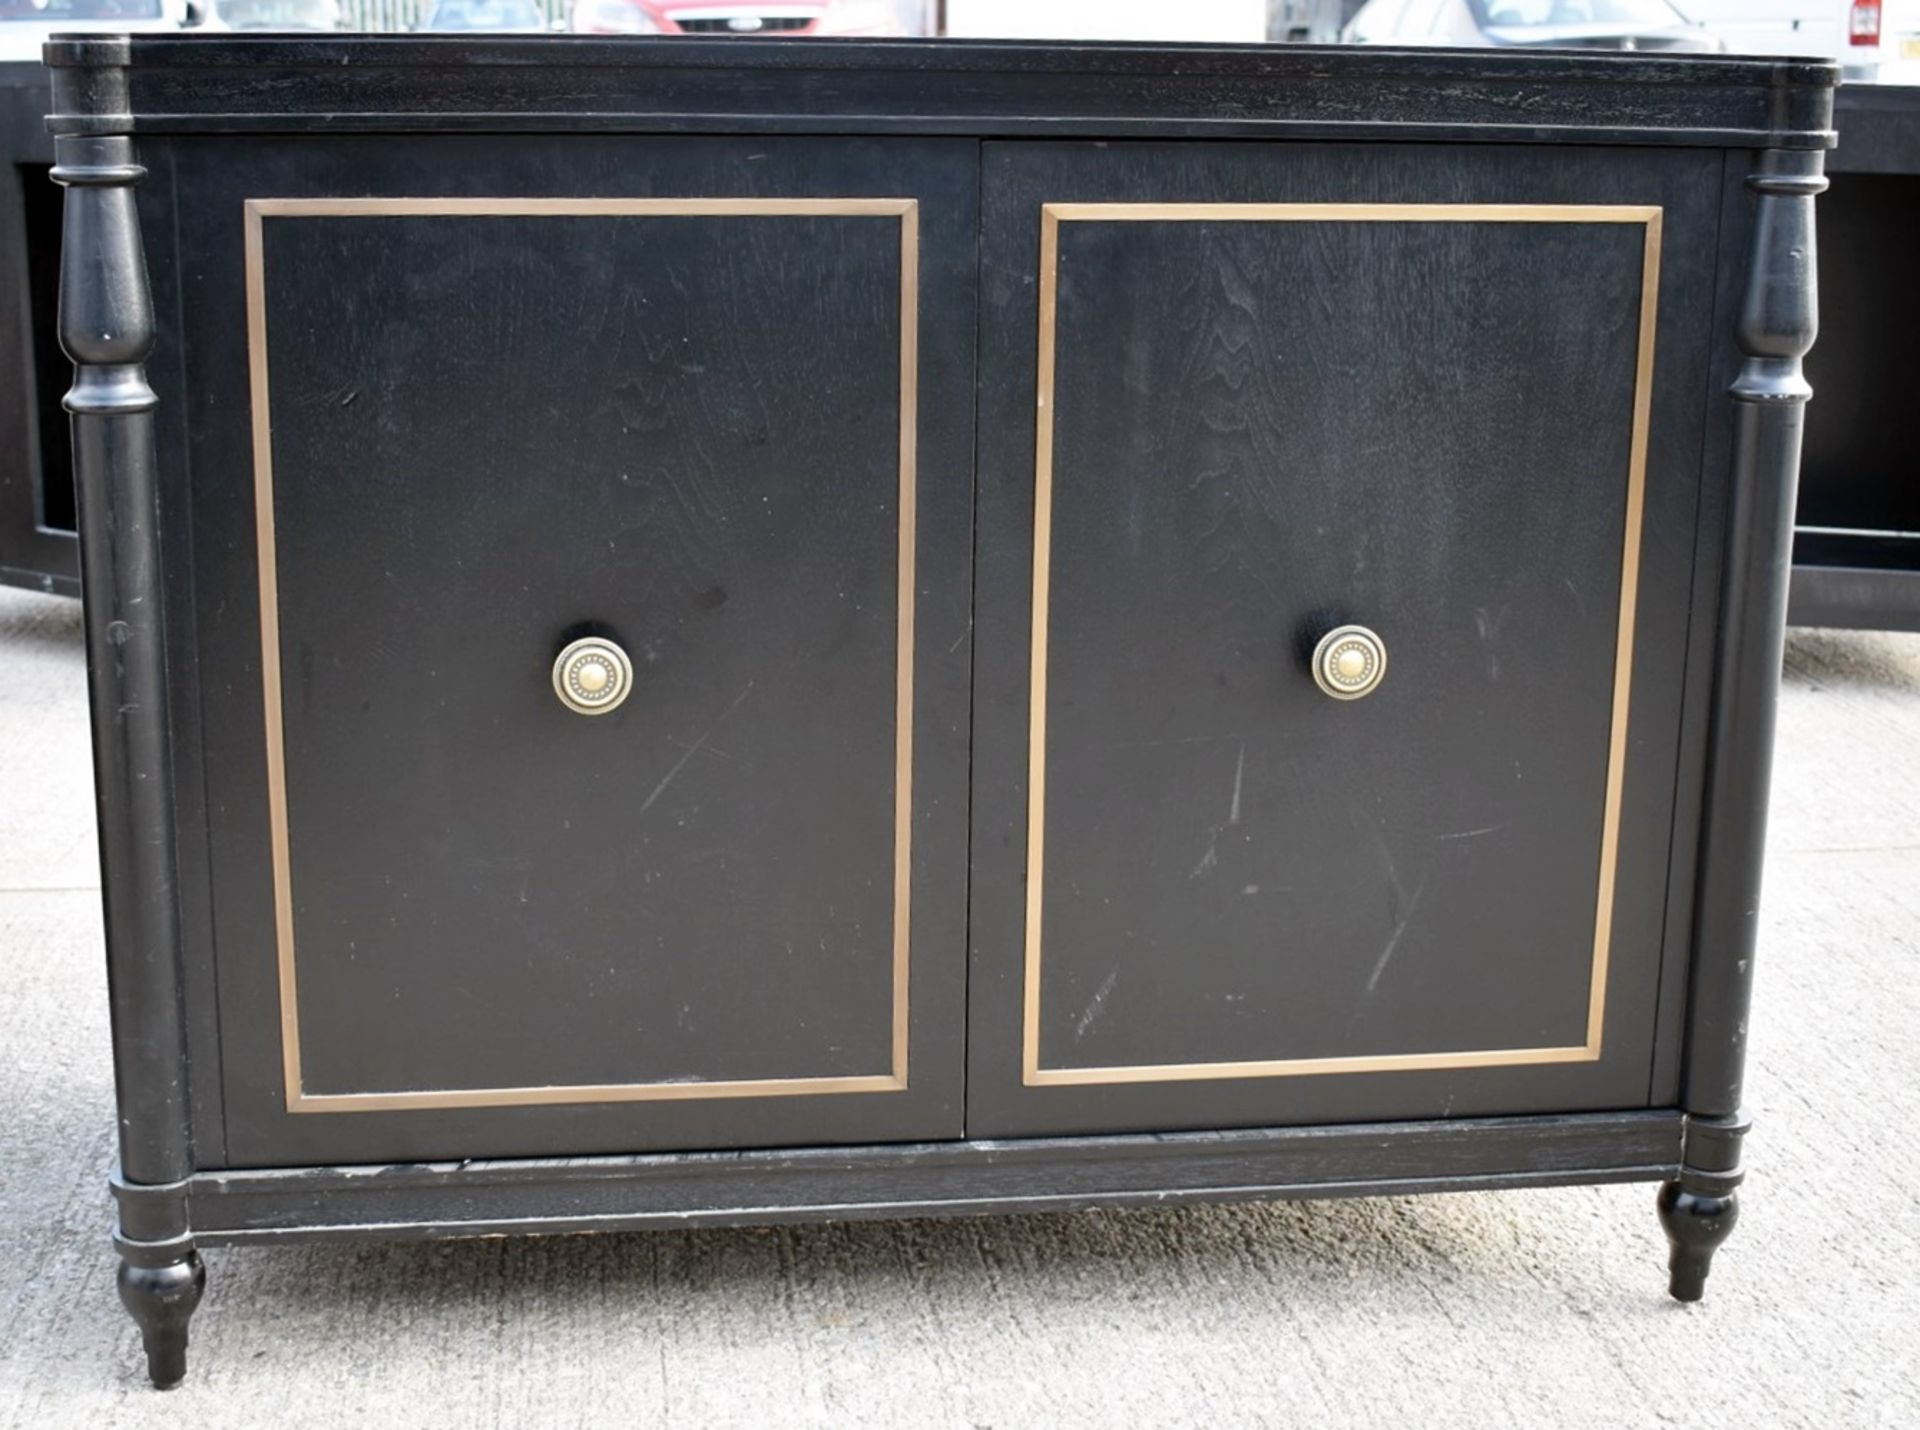 1 x Opulent 2-Door French Period-Style Handcrafted Solid Wood Cabinet in Black, with Brass Inlaid - Image 2 of 12